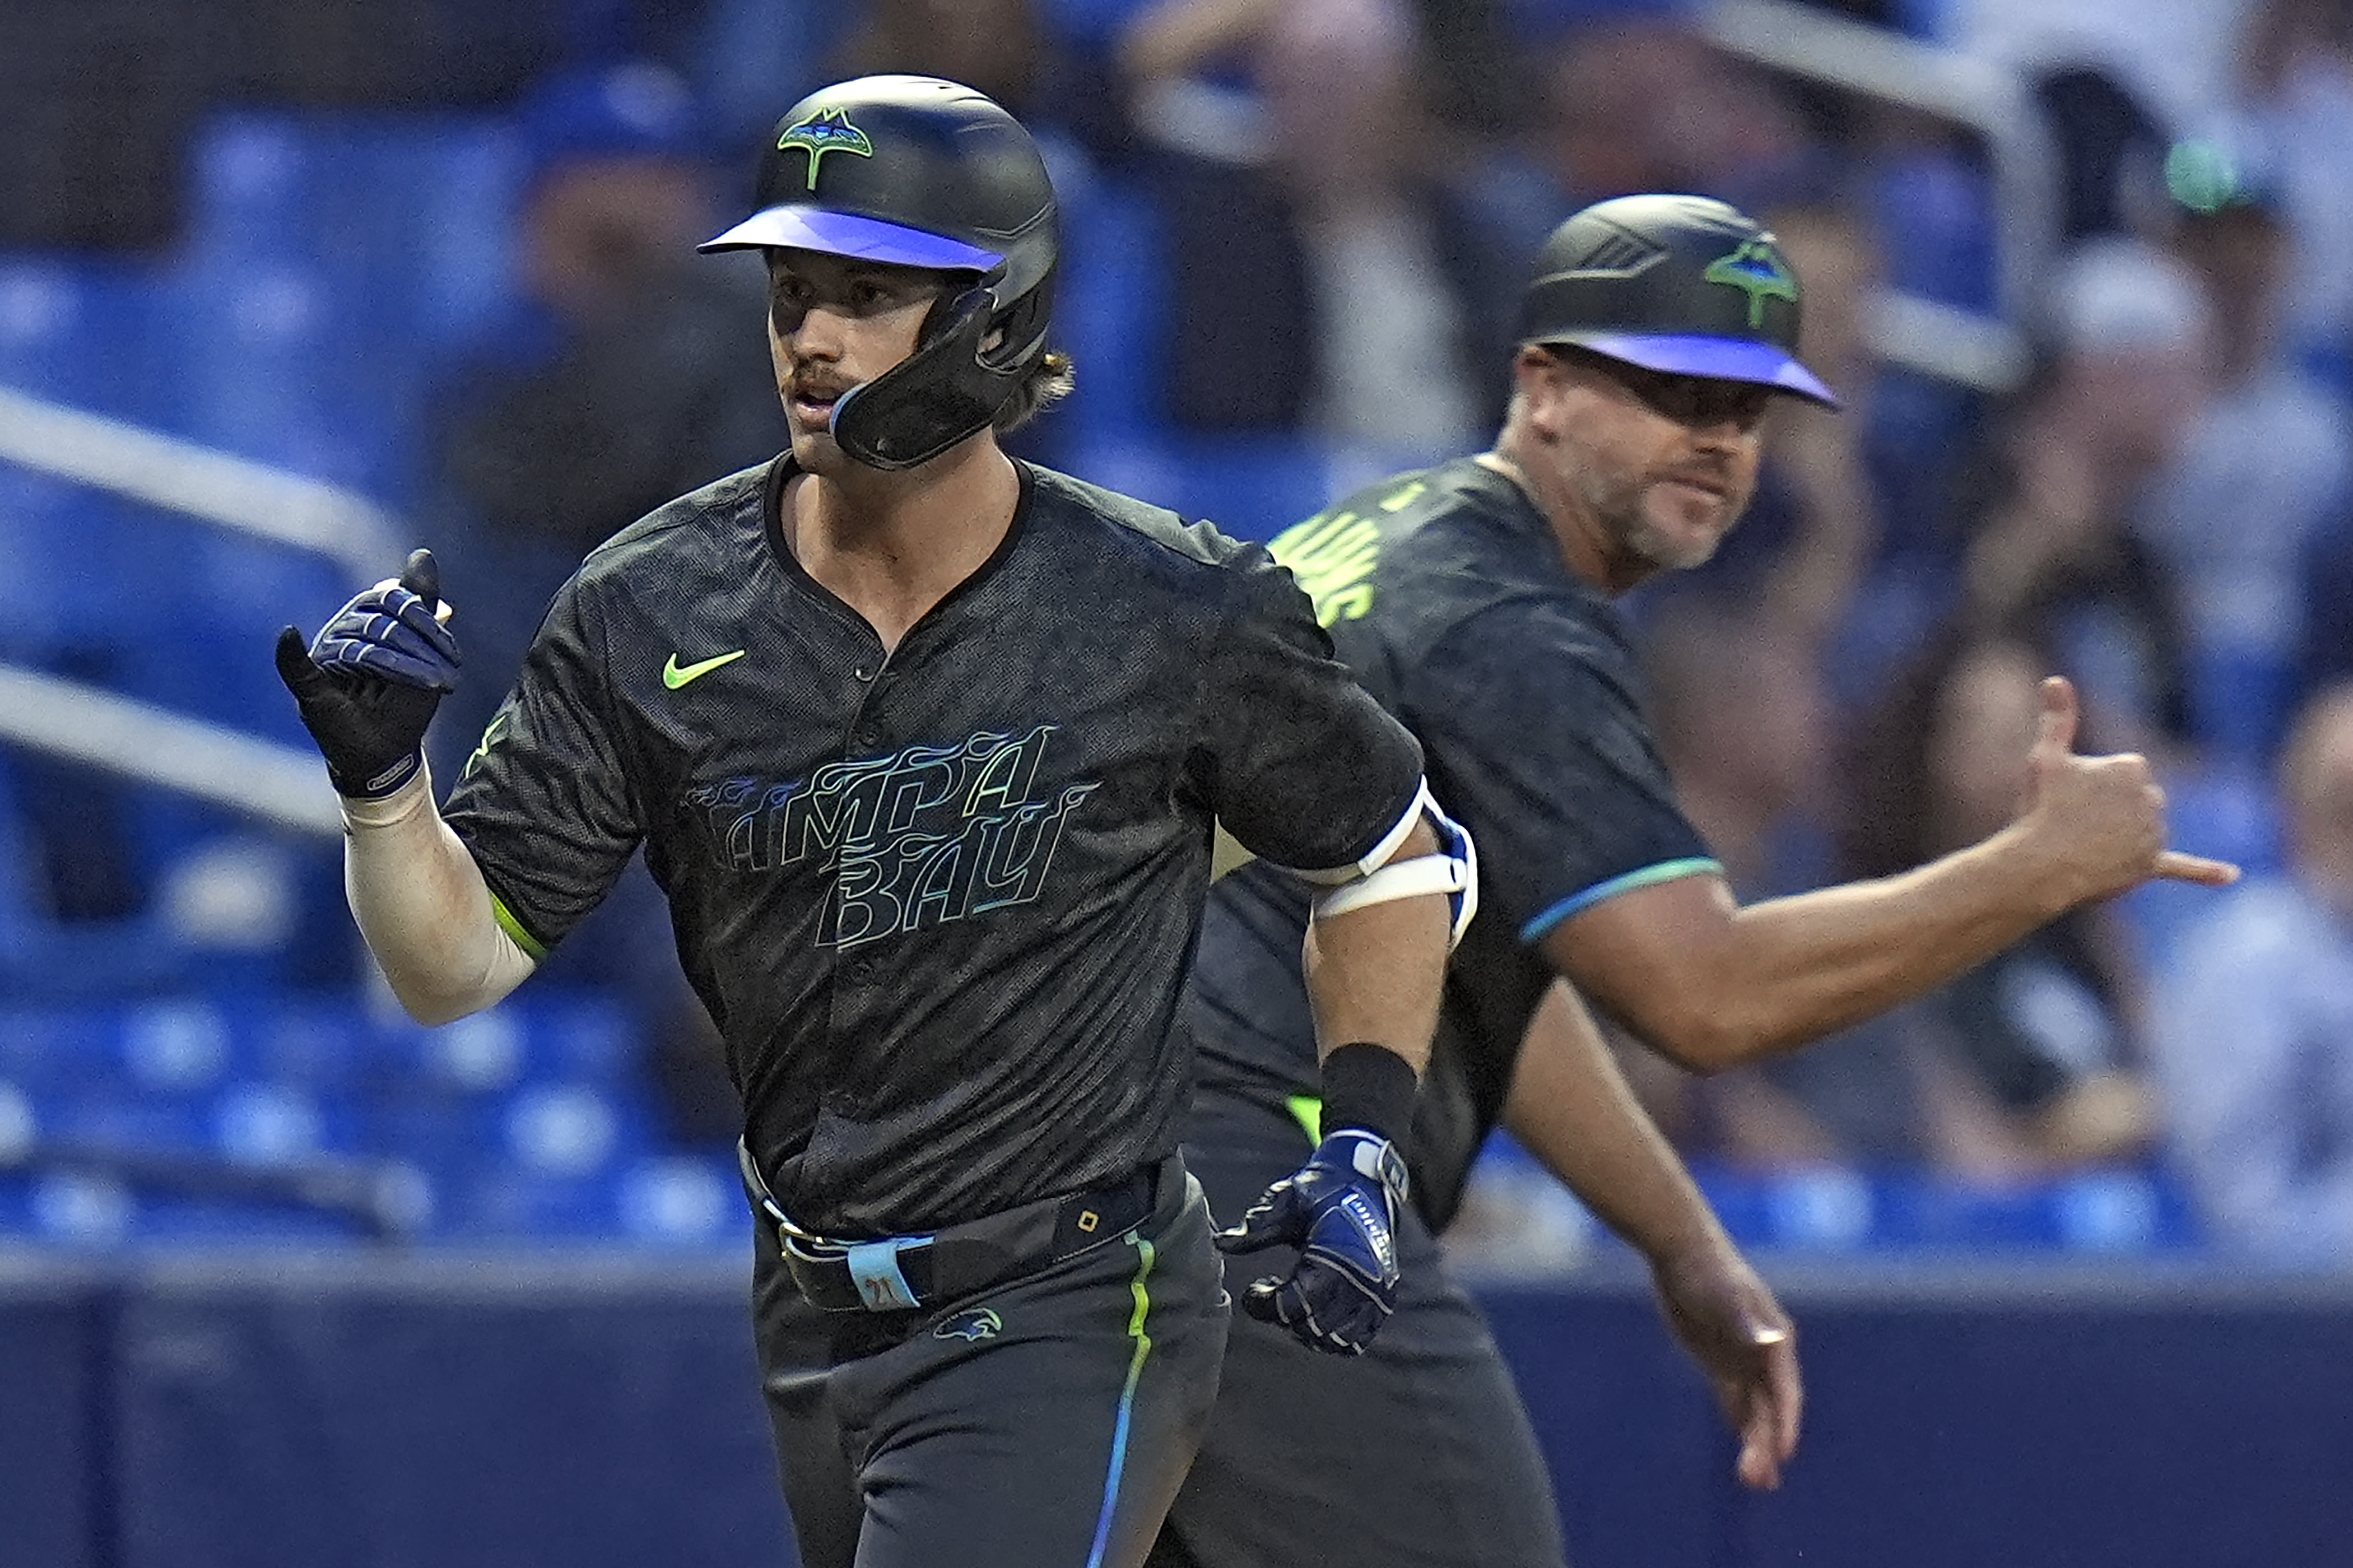 DeLuca stays hot with homer and 4 RBIs as Rays beat Clevinger and White Sox 8-2